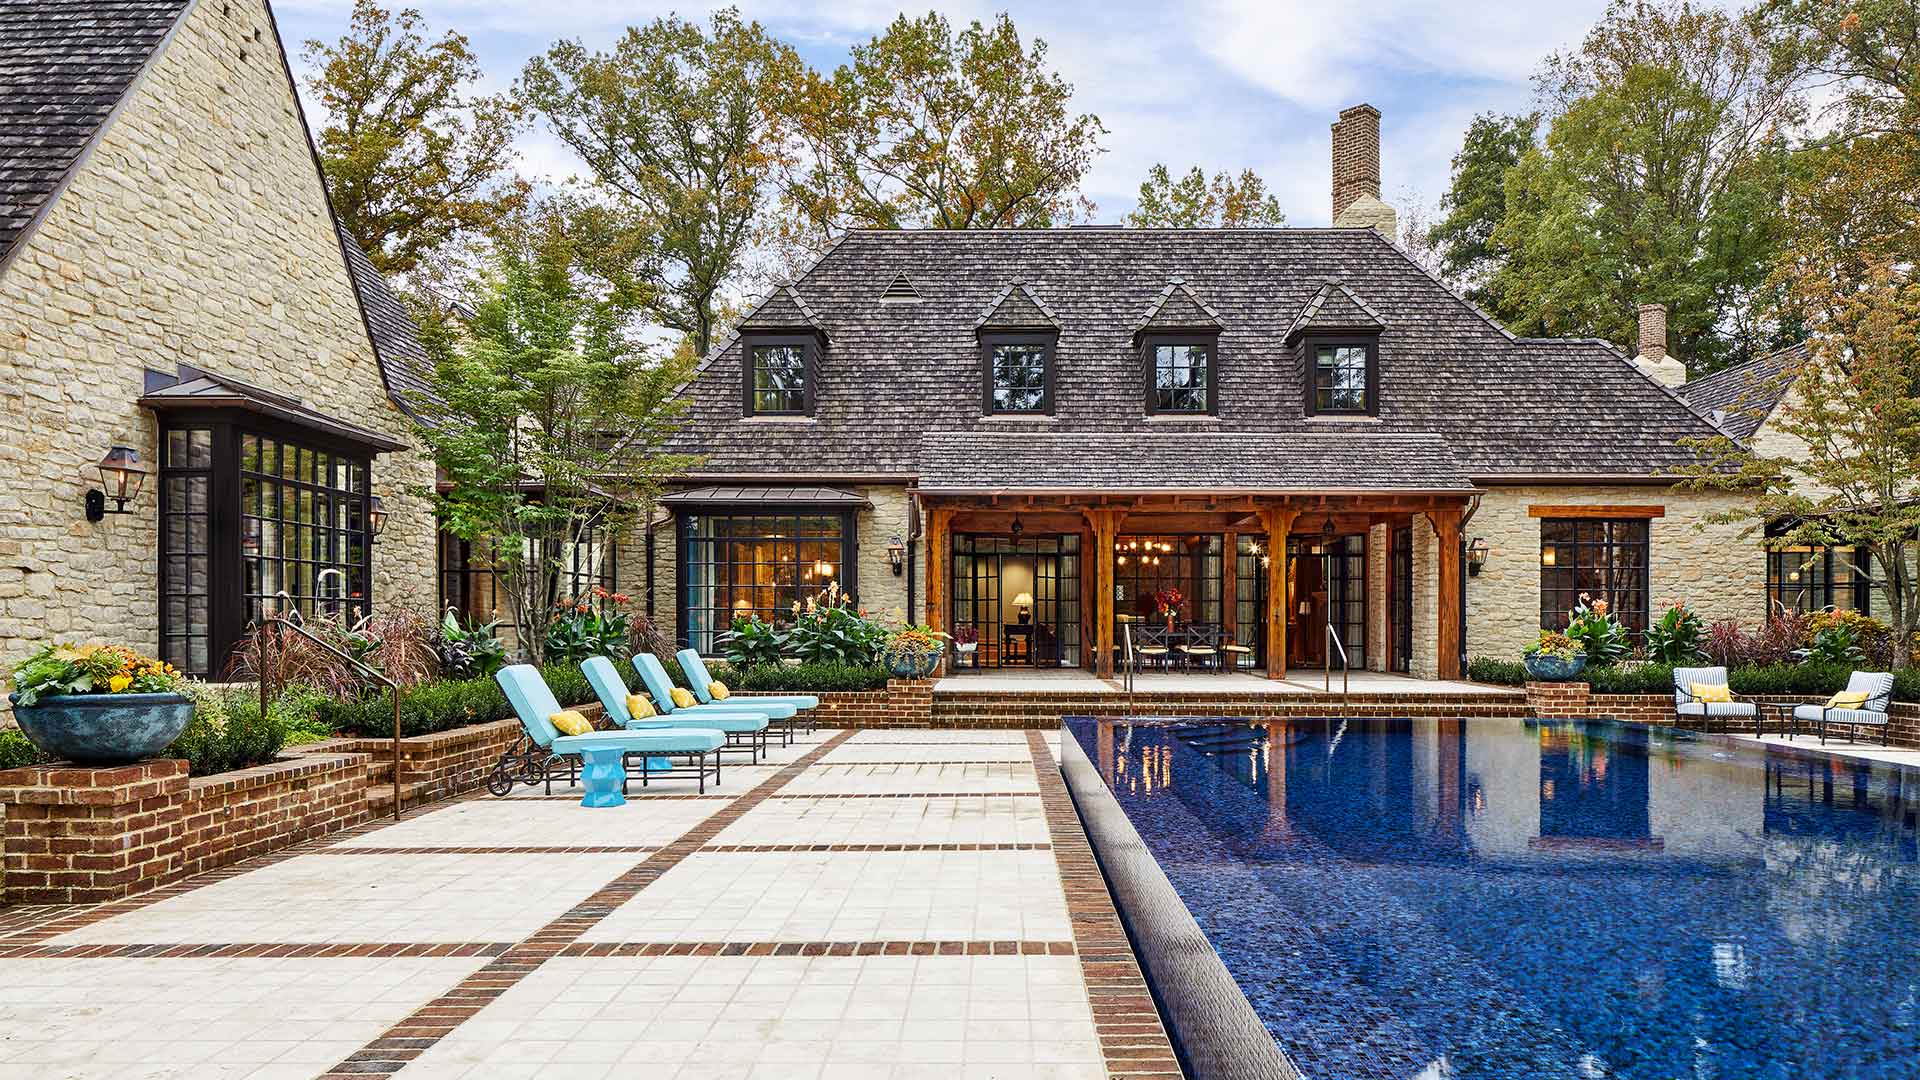 A fancy big house with a pool